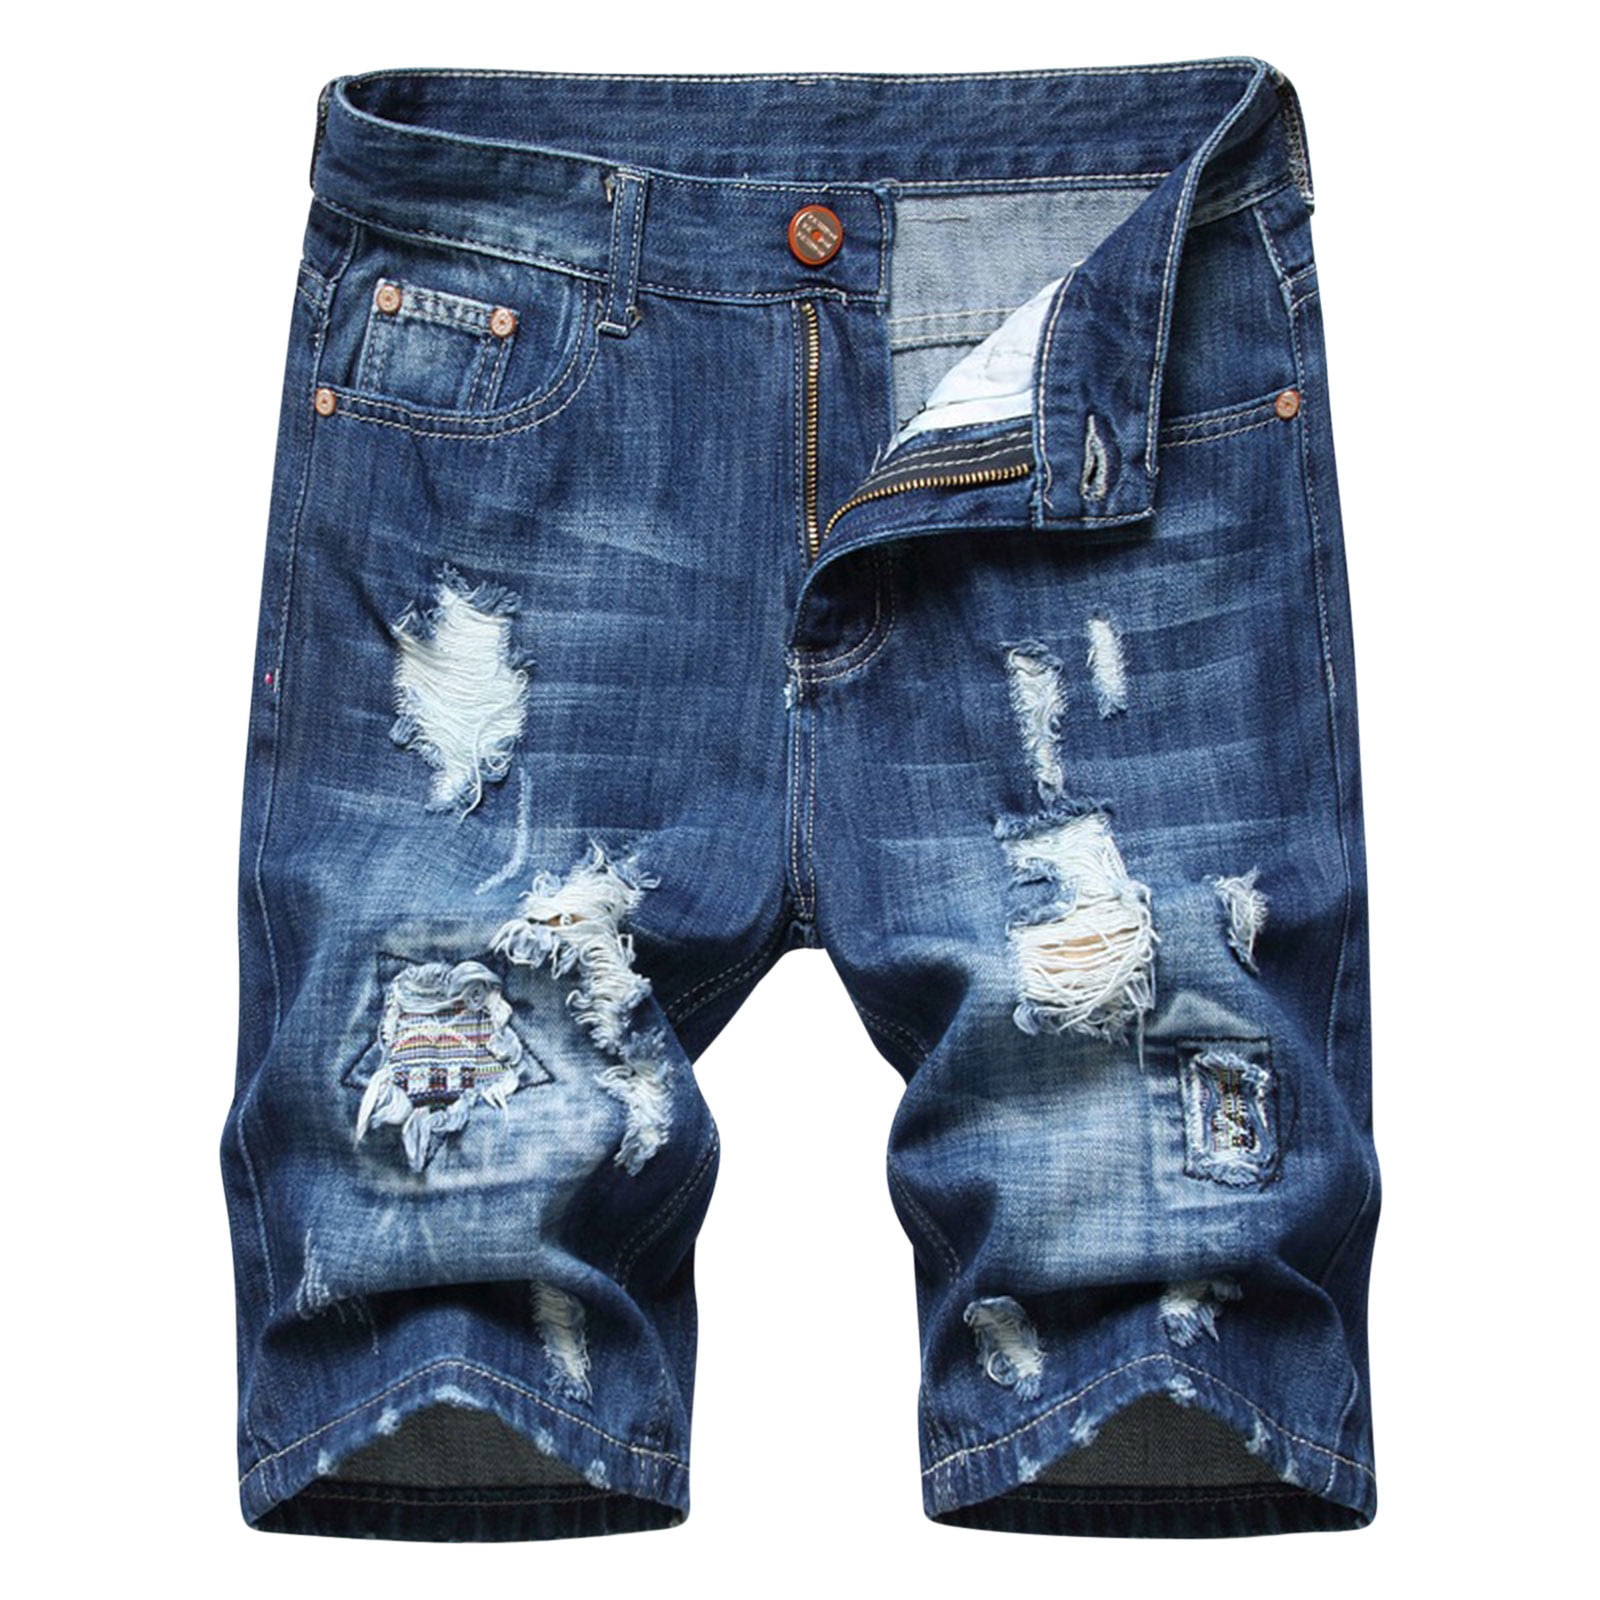 Casual Embroidery Denim Shorts for Men / Knee Length Jeans Shorts